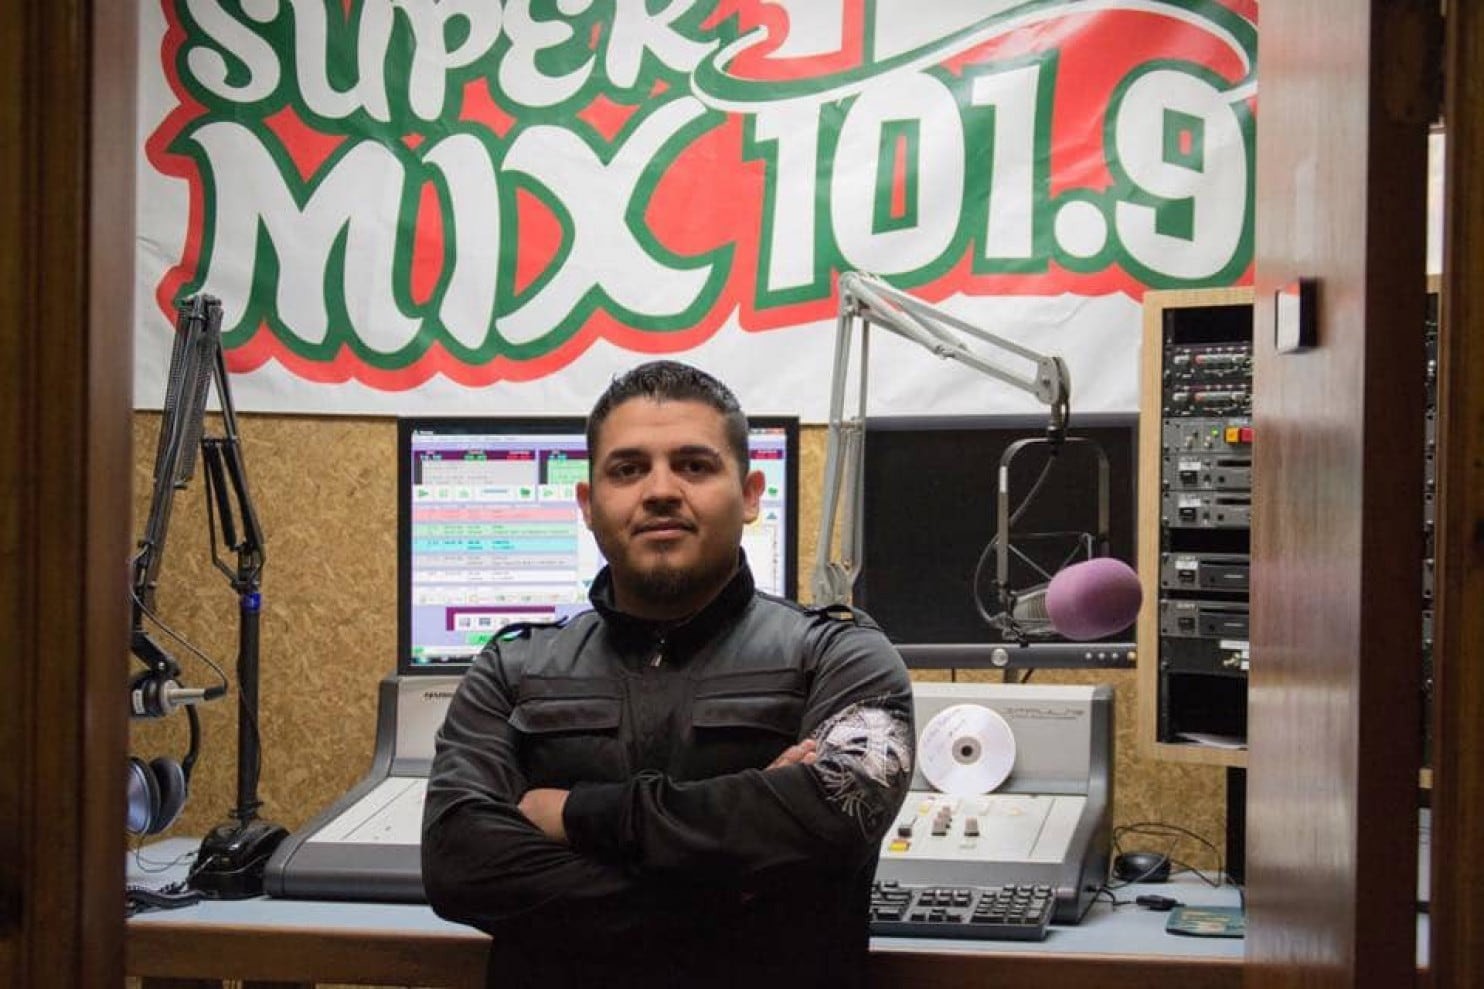 Alonso Guillen is pictured at his job as a radio host in Lufkin, Texas. He died trying to rescue victims of flooding in Houston. Photo: Courtesy of Jesus Guillen